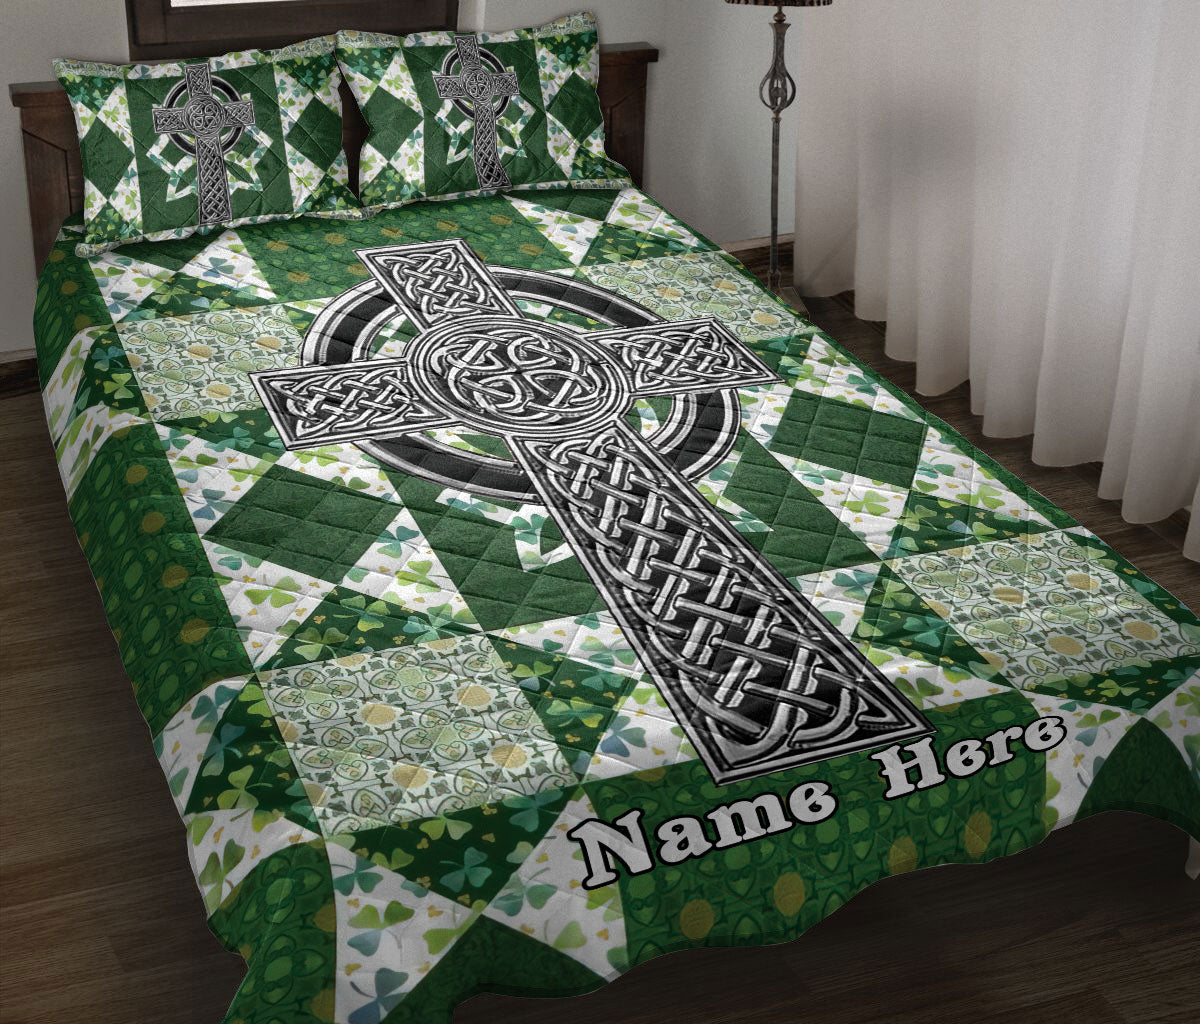 Ohaprints-Quilt-Bed-Set-Pillowcase-Irish-Celtic-Knot-Shamrock-Green-&-White-Patchwork-Custom-Personalized-Name-Blanket-Bedspread-Bedding-1088-Throw (55'' x 60'')